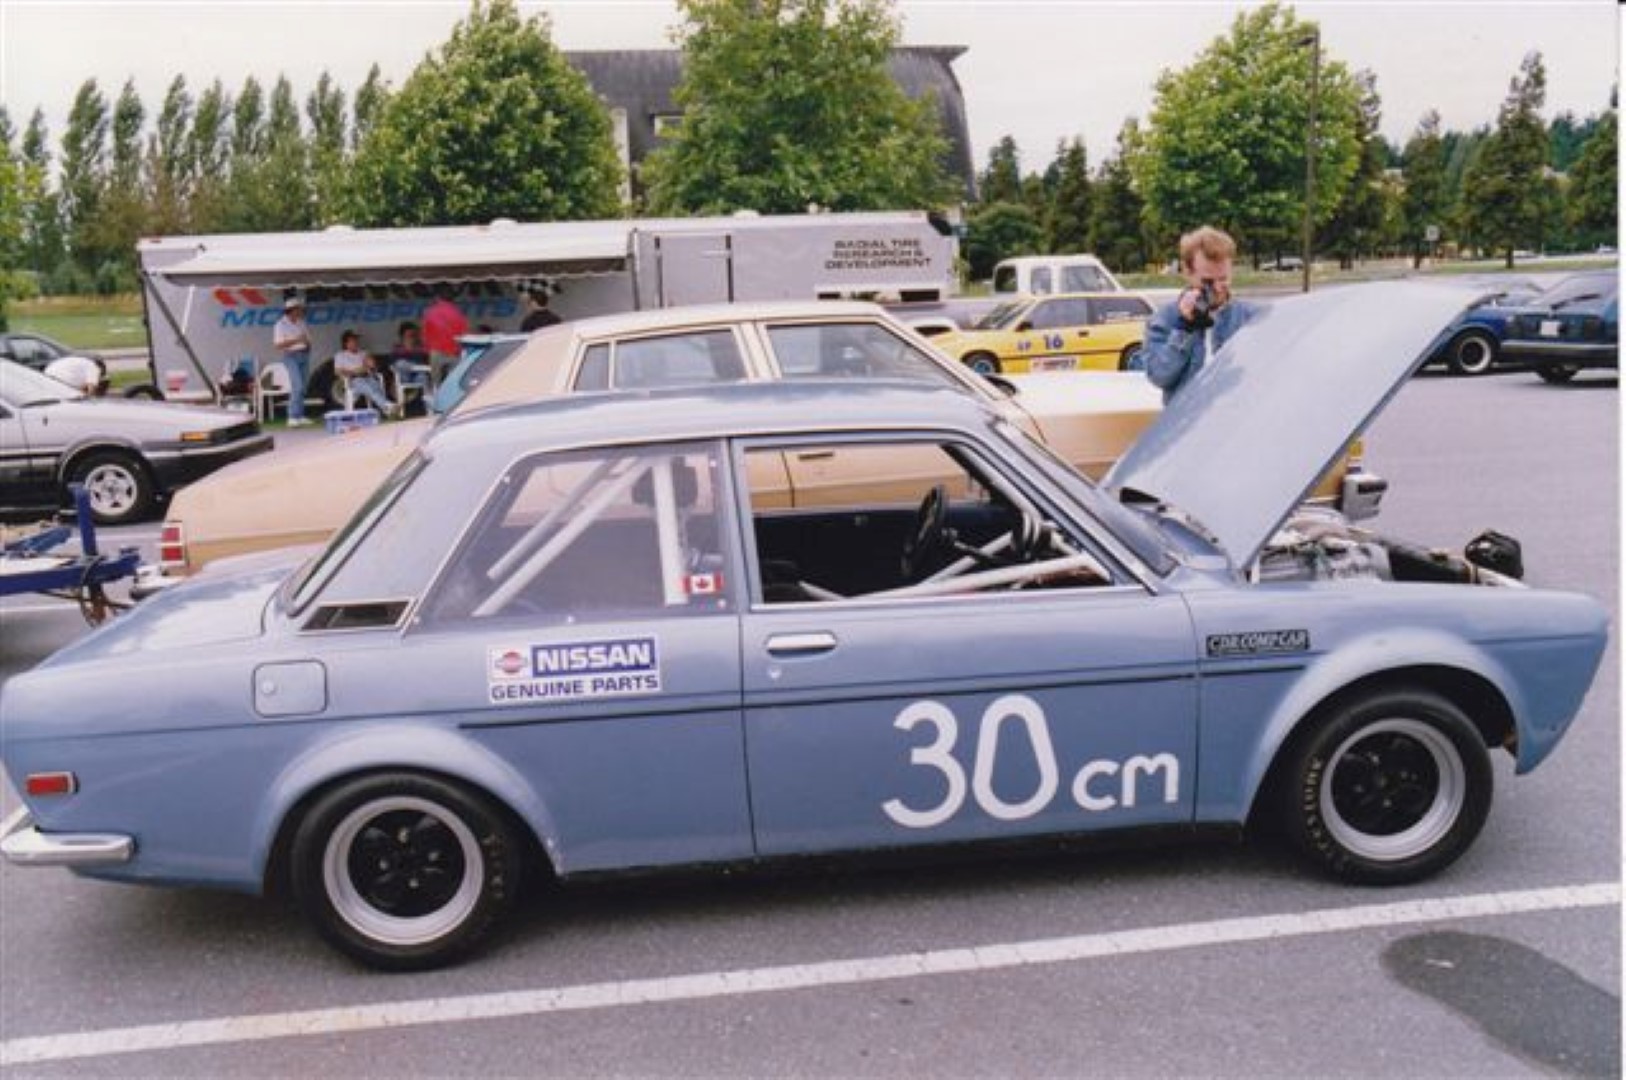 Dave Christie's 2L monster, he and I battled for years. It has now been sold and may end up as a track car, maybe Solo